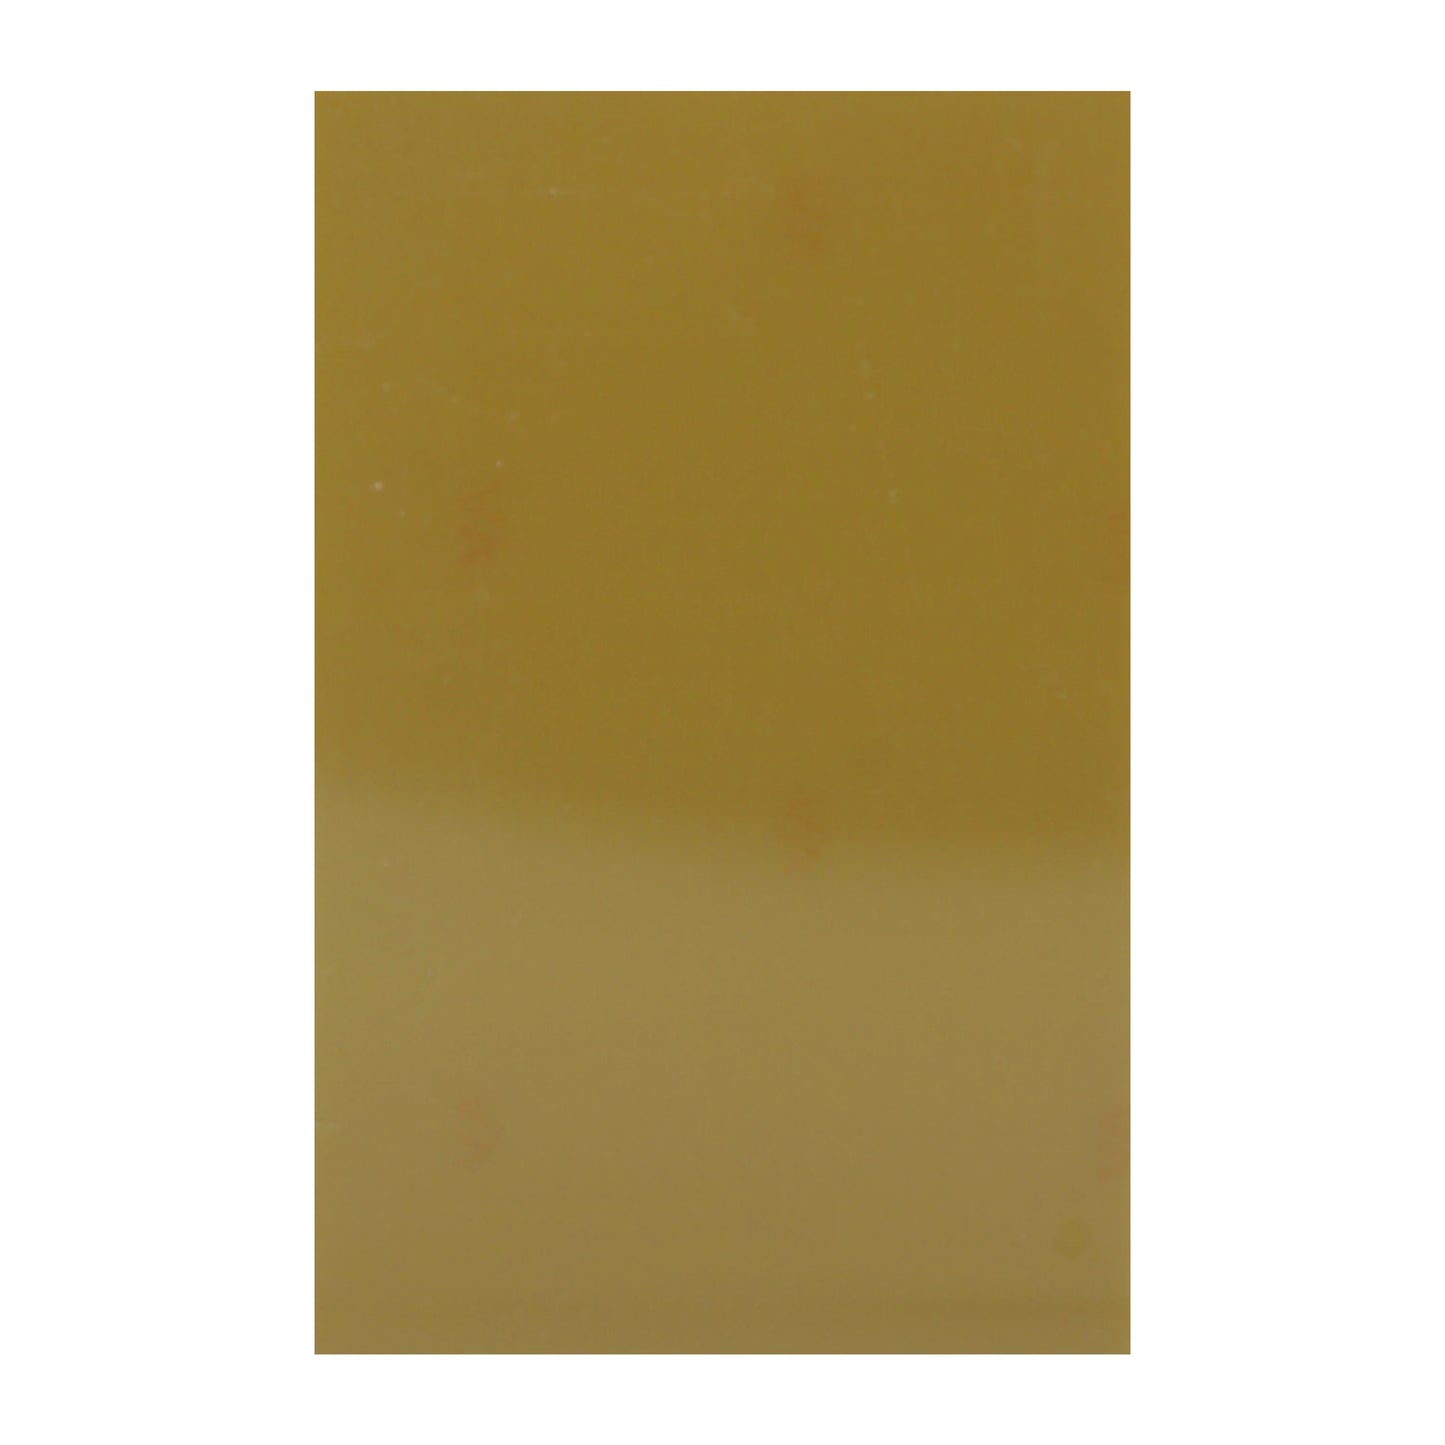 1.6 mm Thick SINGLE Sided Copper Clad Laminate Circuit Board 8 x 6 Inch (FR4 Glass Epoxy PCB) - 5 Units